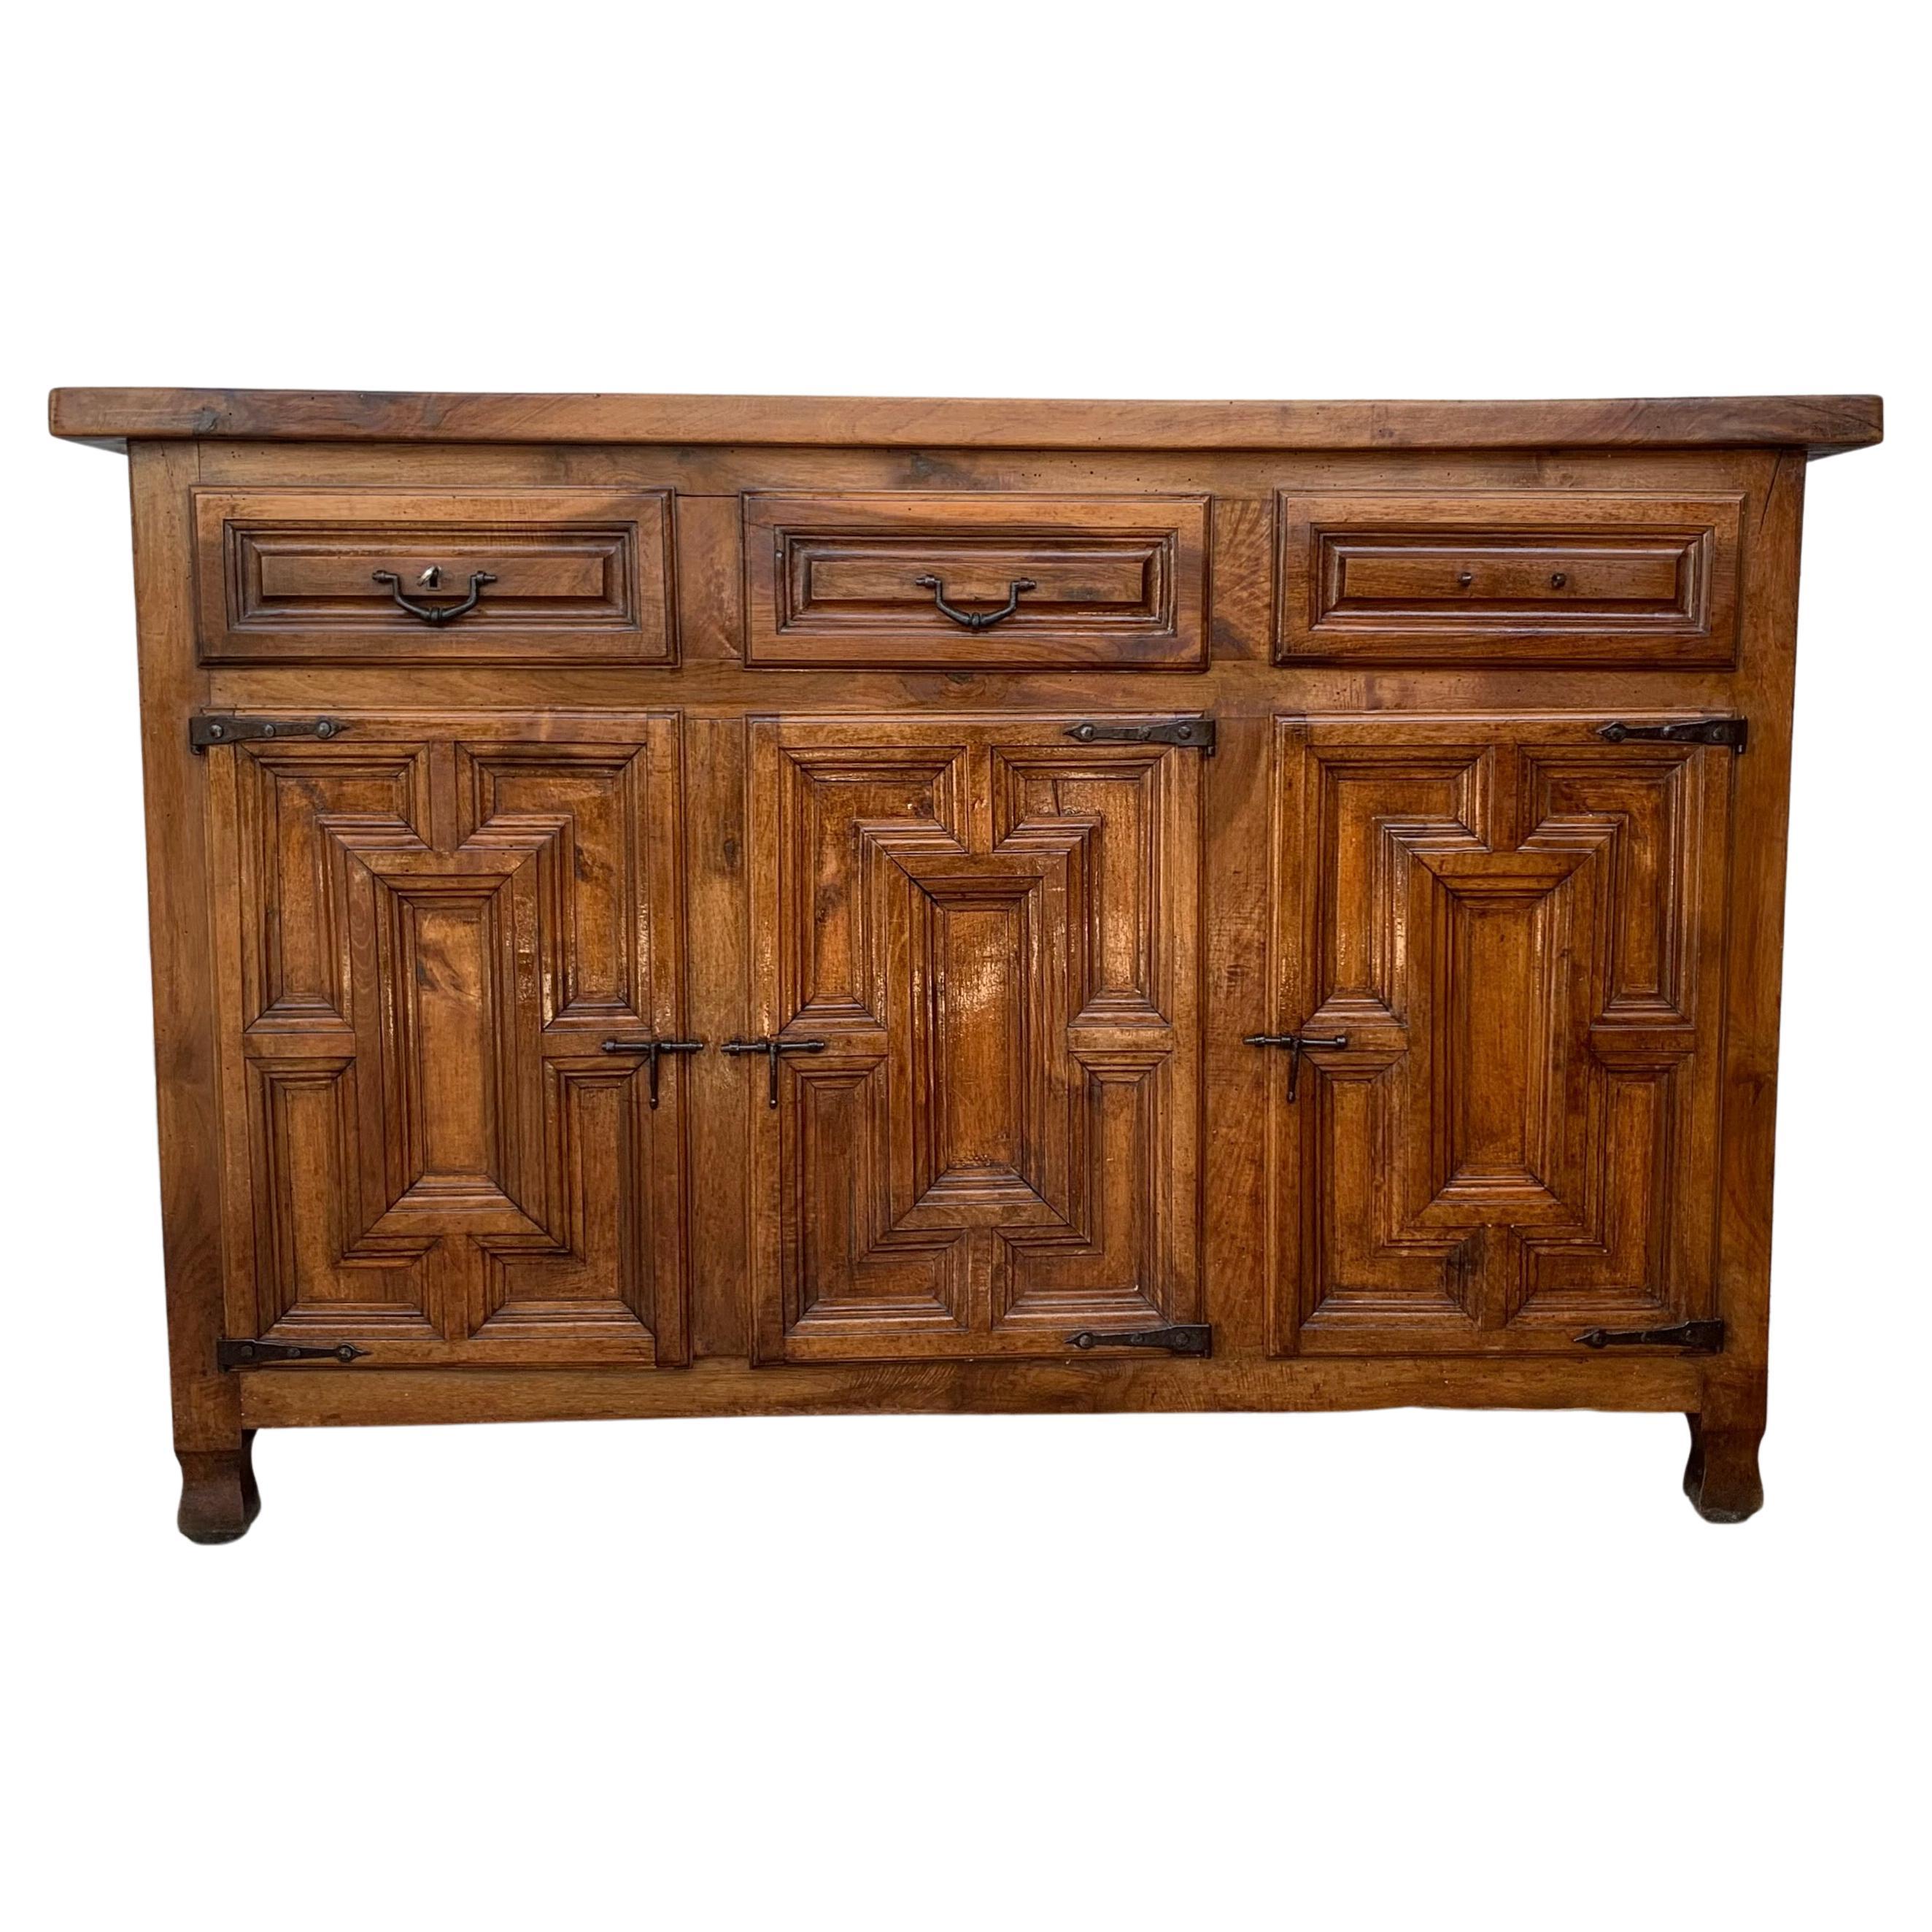 19th Large Catalan Spanish Baroque Carved Light Walnut Credenza or Buffet